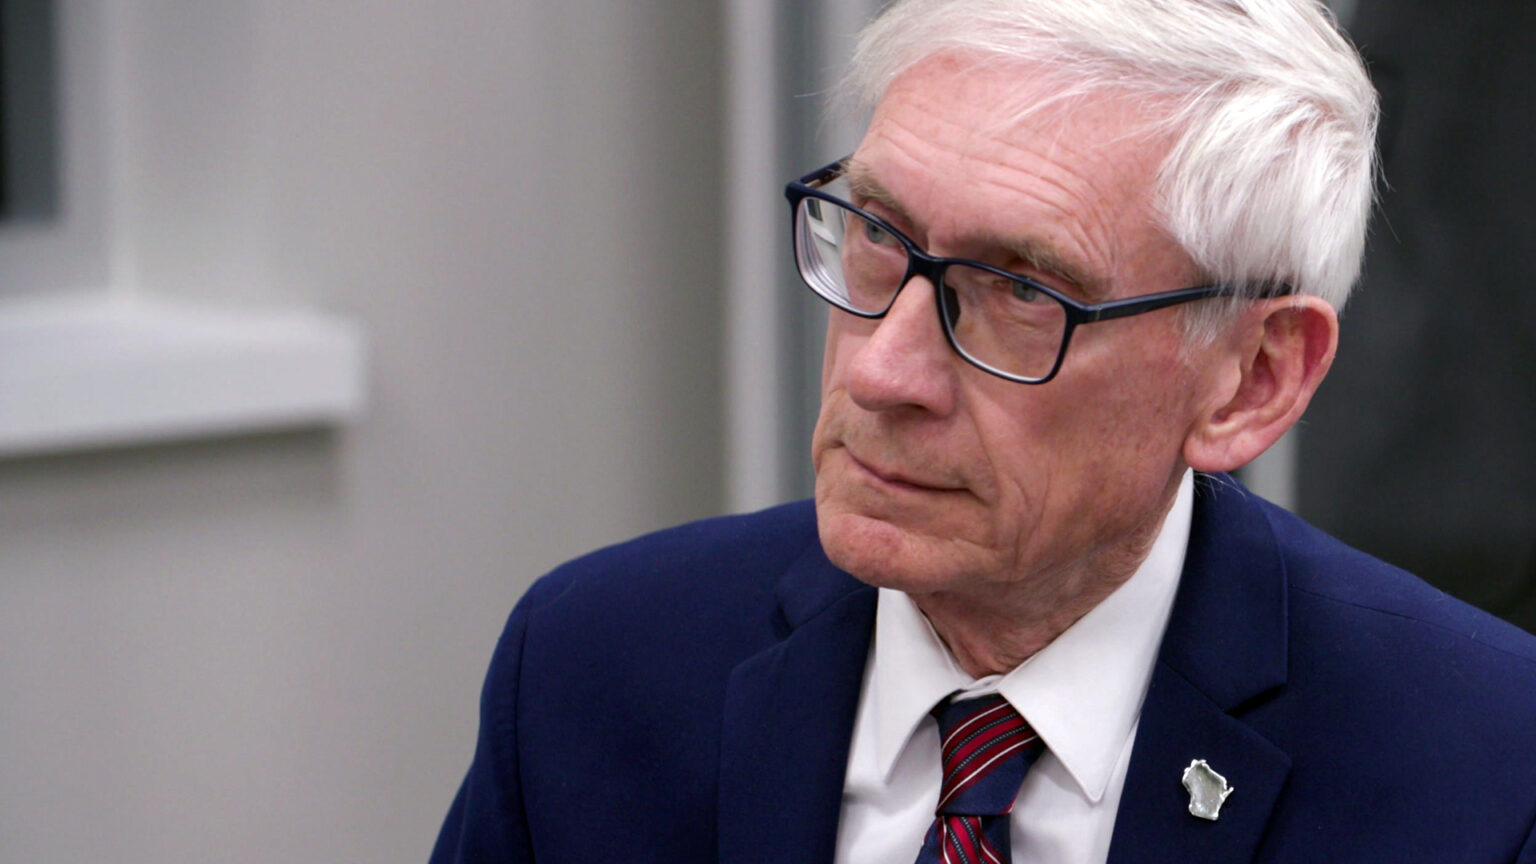 Tony Evers sits and listens to another person in a room with a windowsill in the background.